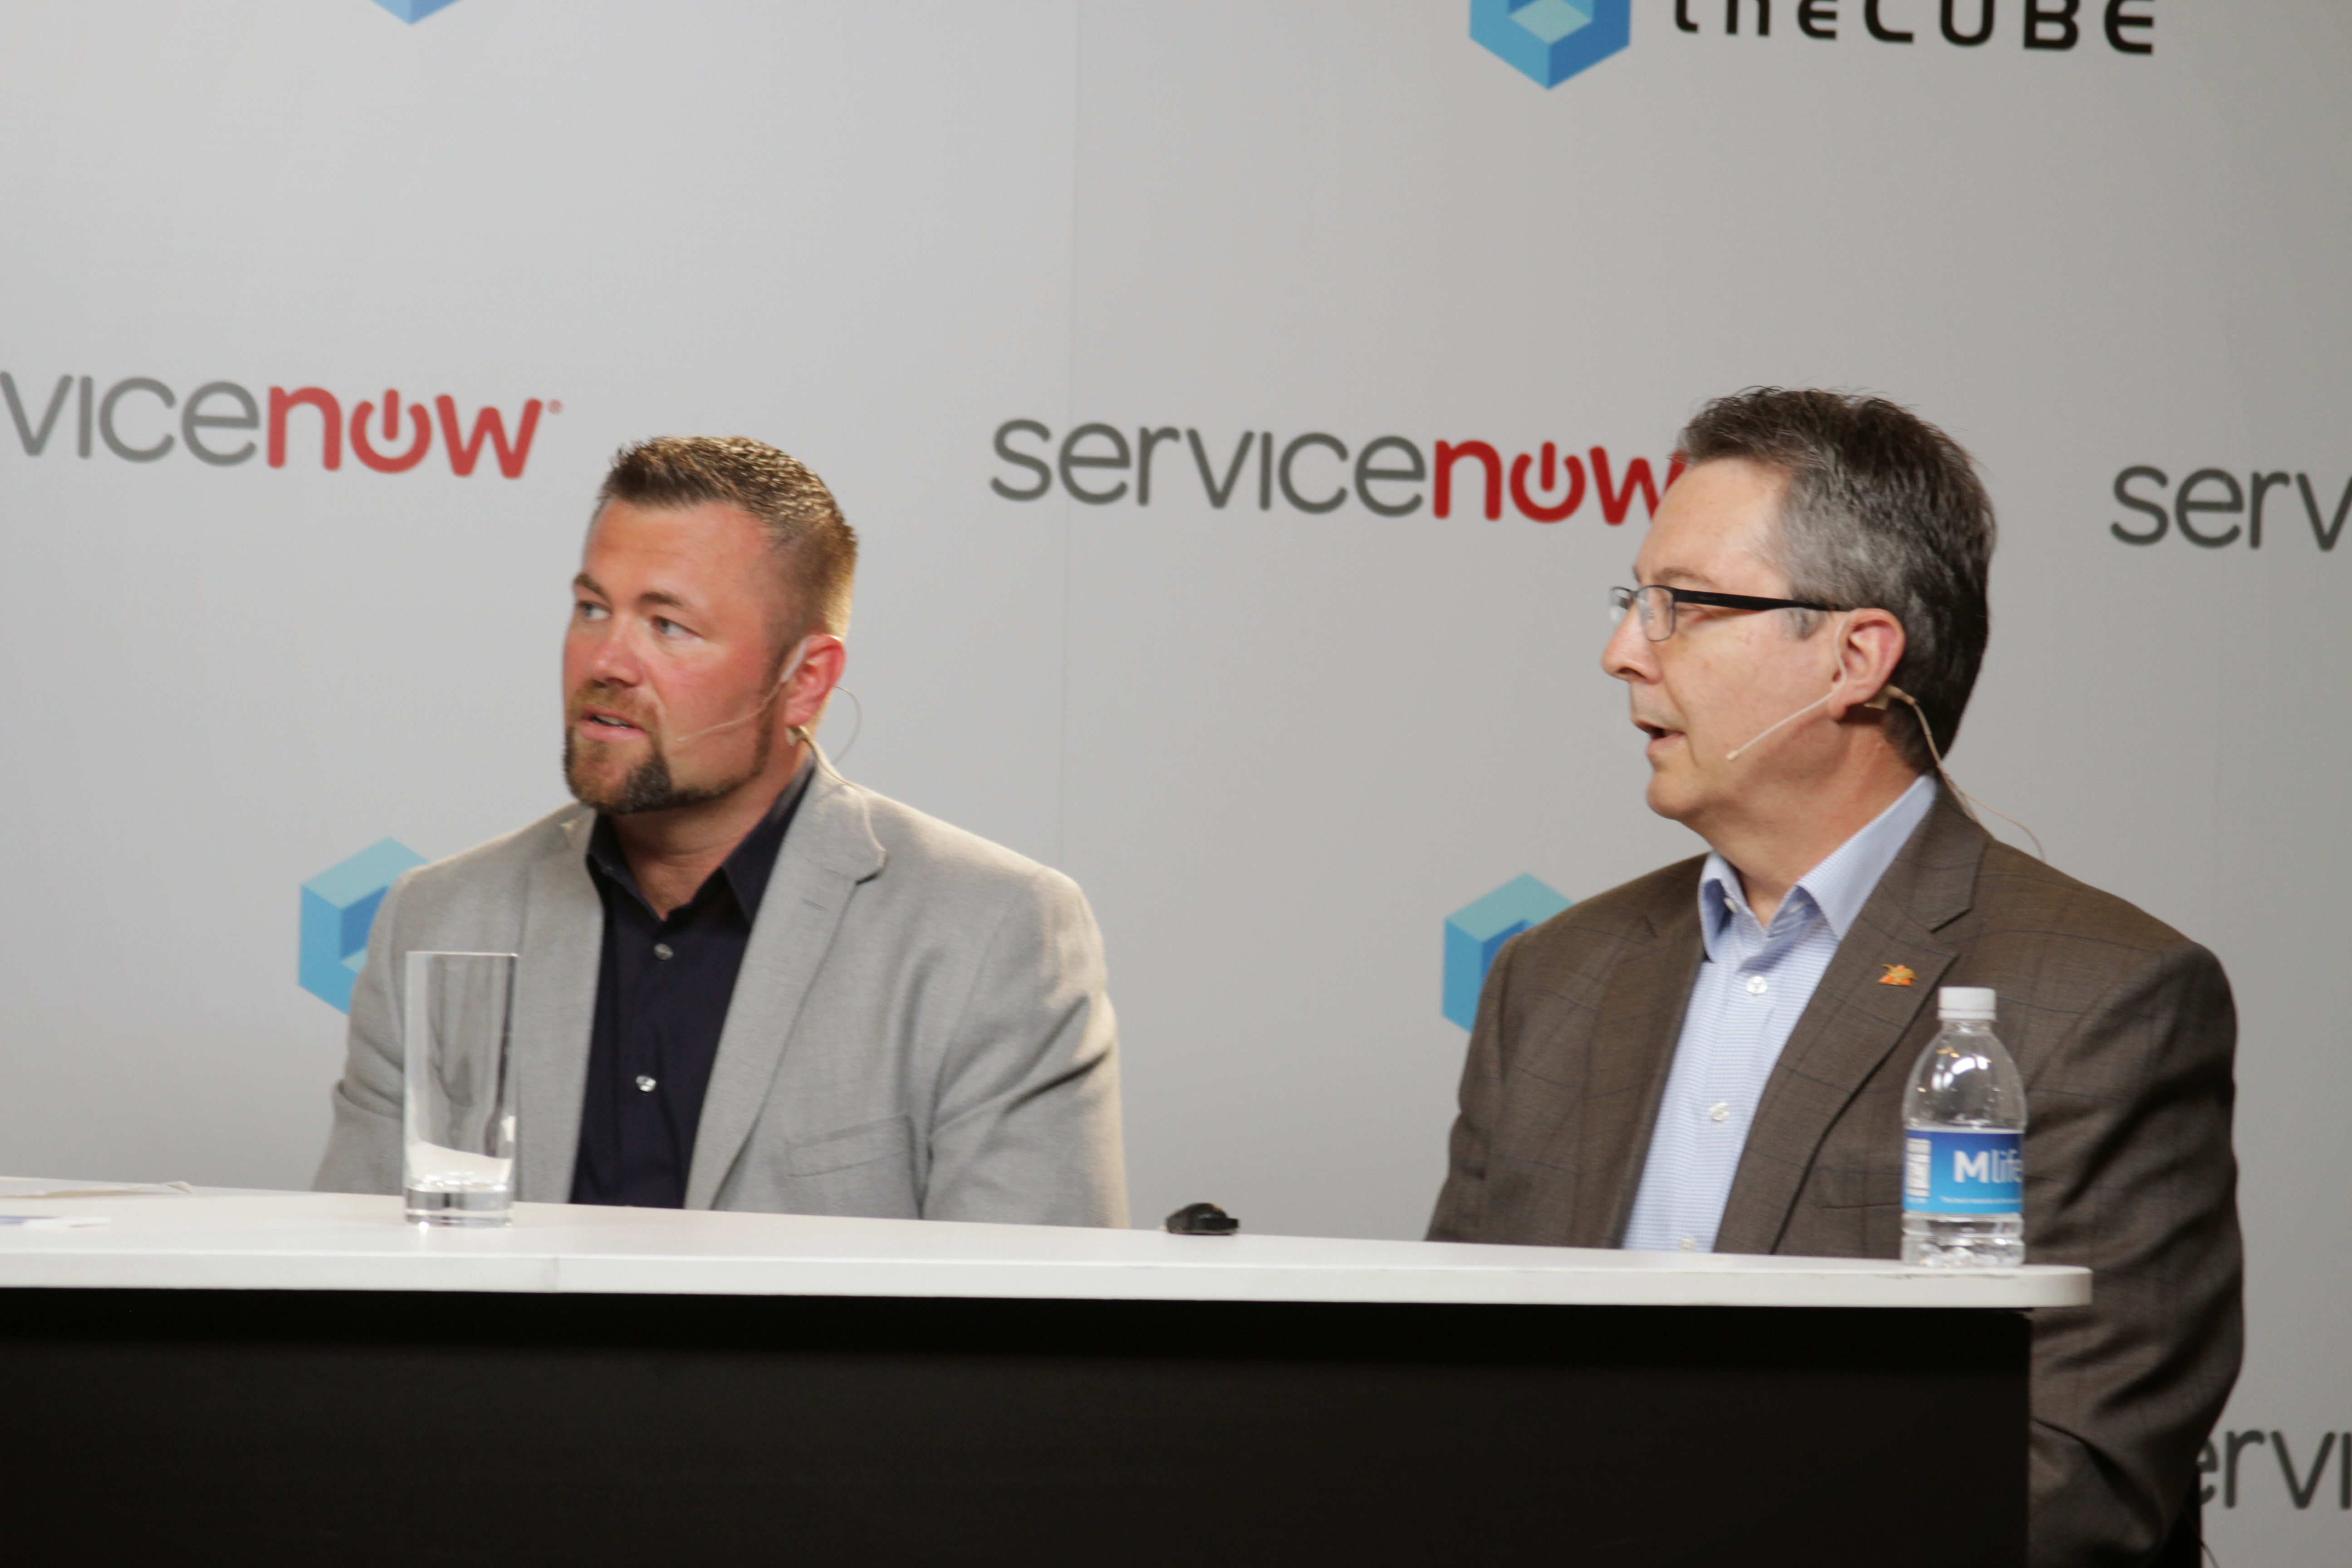 Ashley Furniture Maintains Global Presence With Servicenow